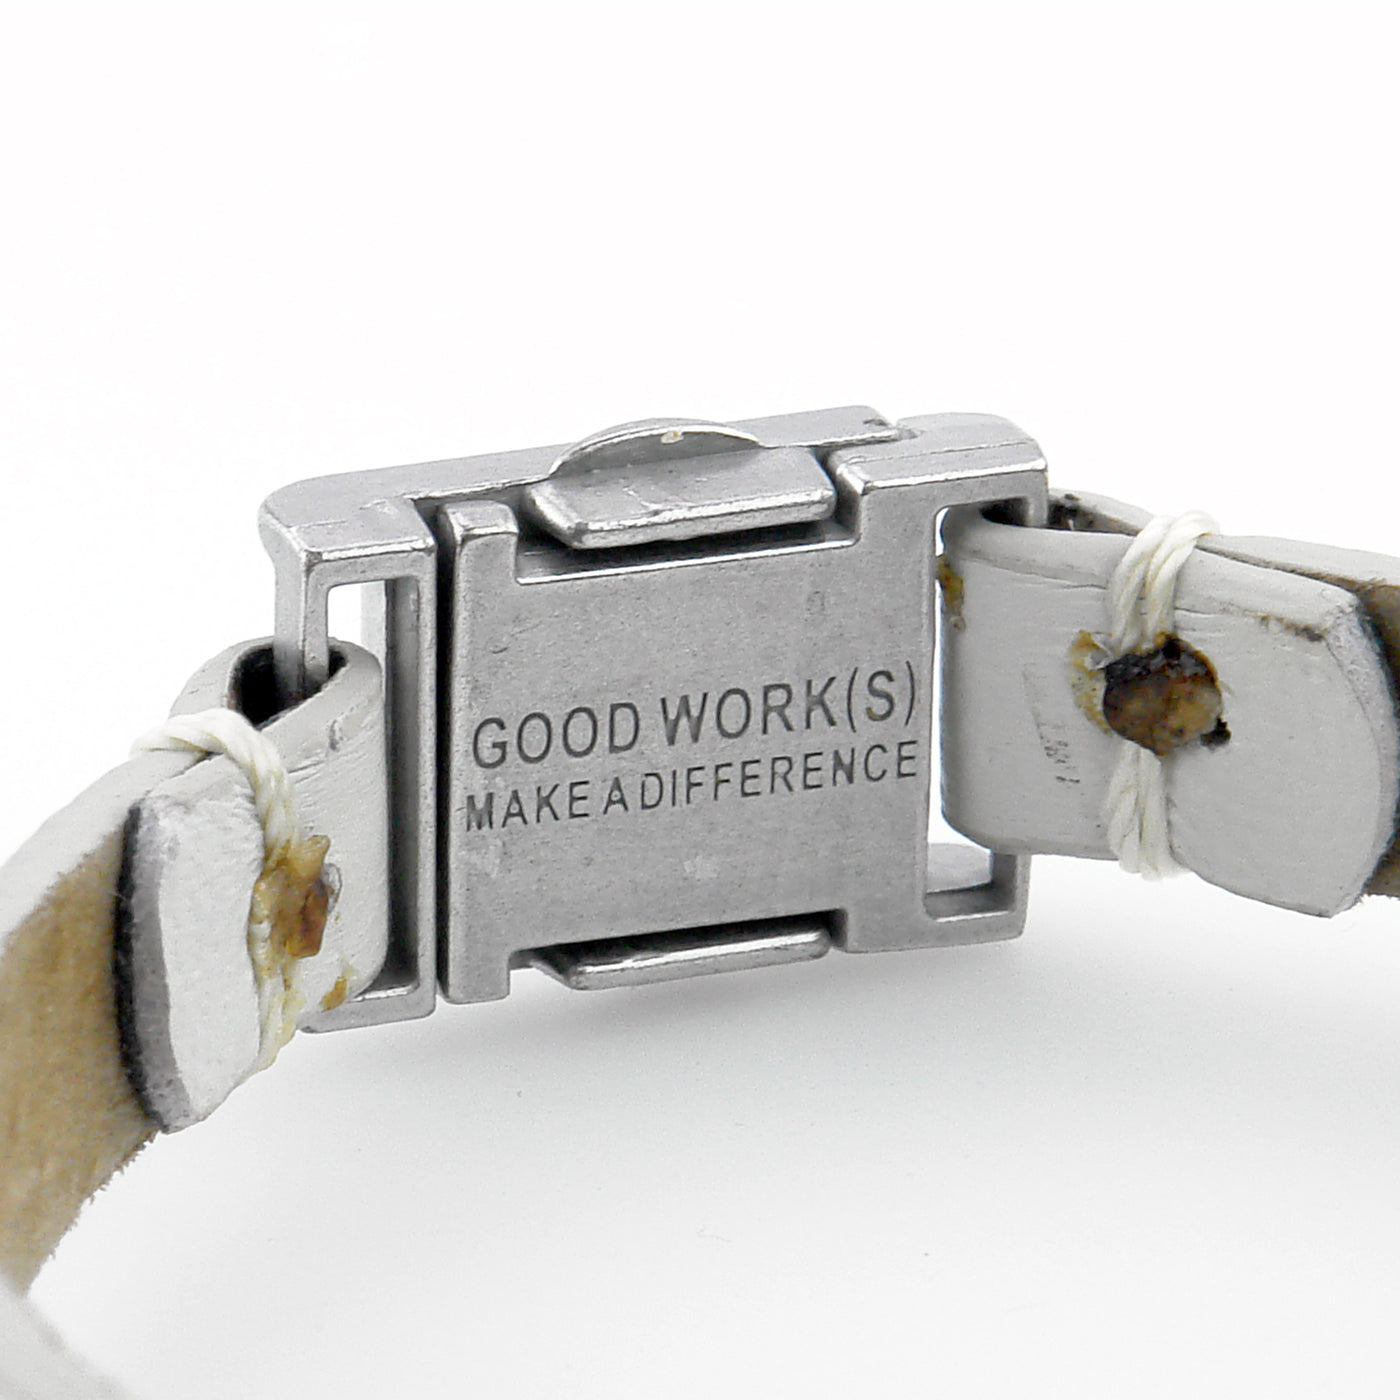 Brilliance Single Bracelet-Good Work(s) Make A Difference® | Christian and Inspirational Jewelry Company in Vernon, California